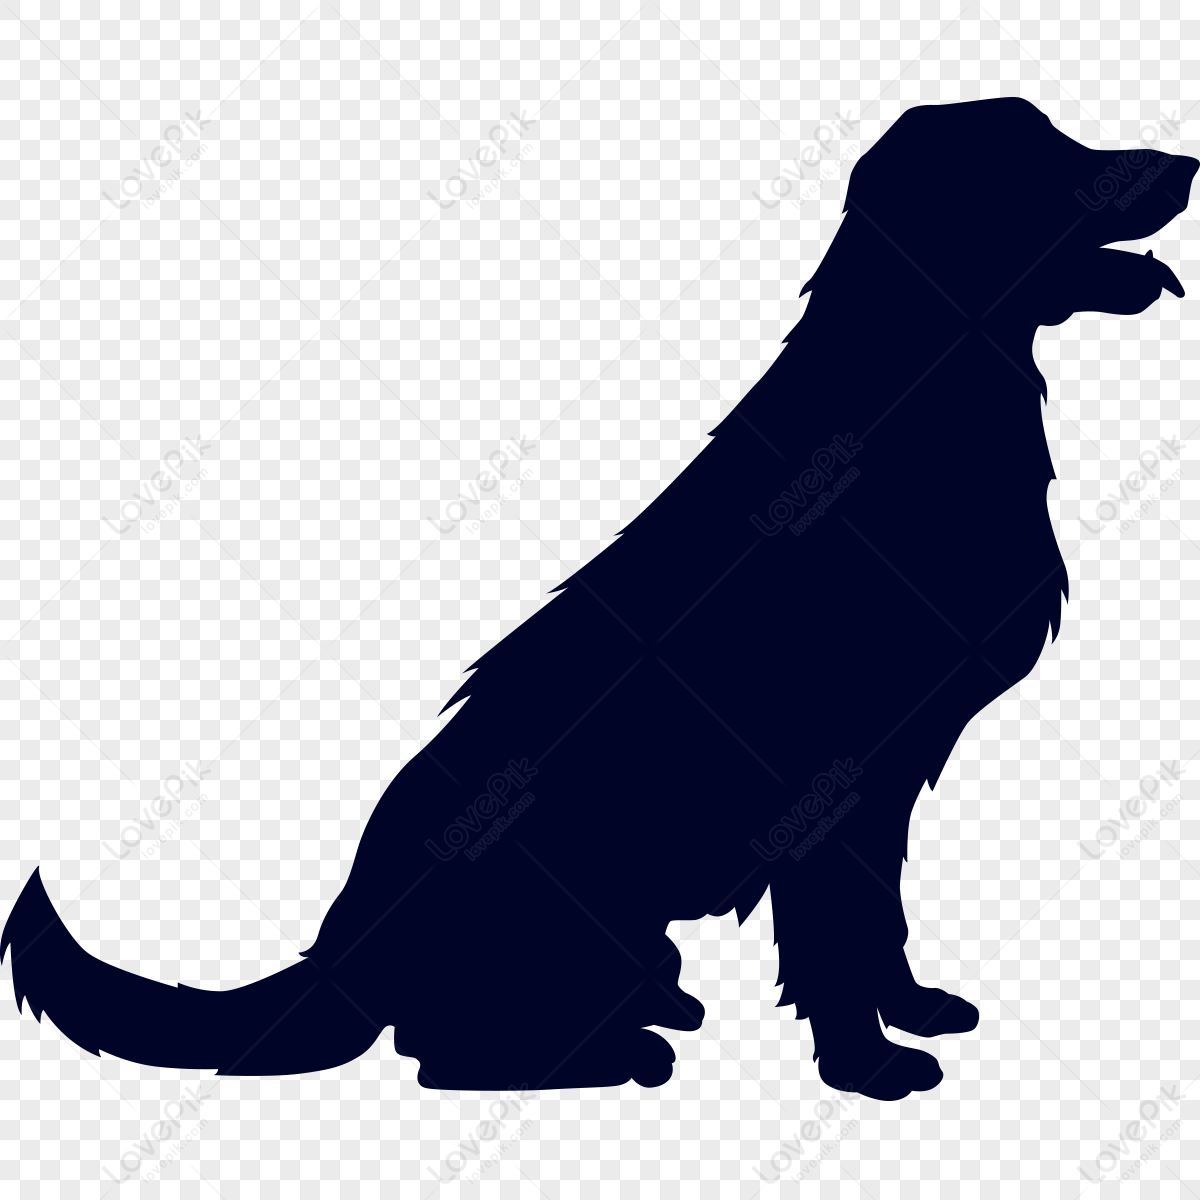 Dog silhouette, material, dog, anime png hd transparent image